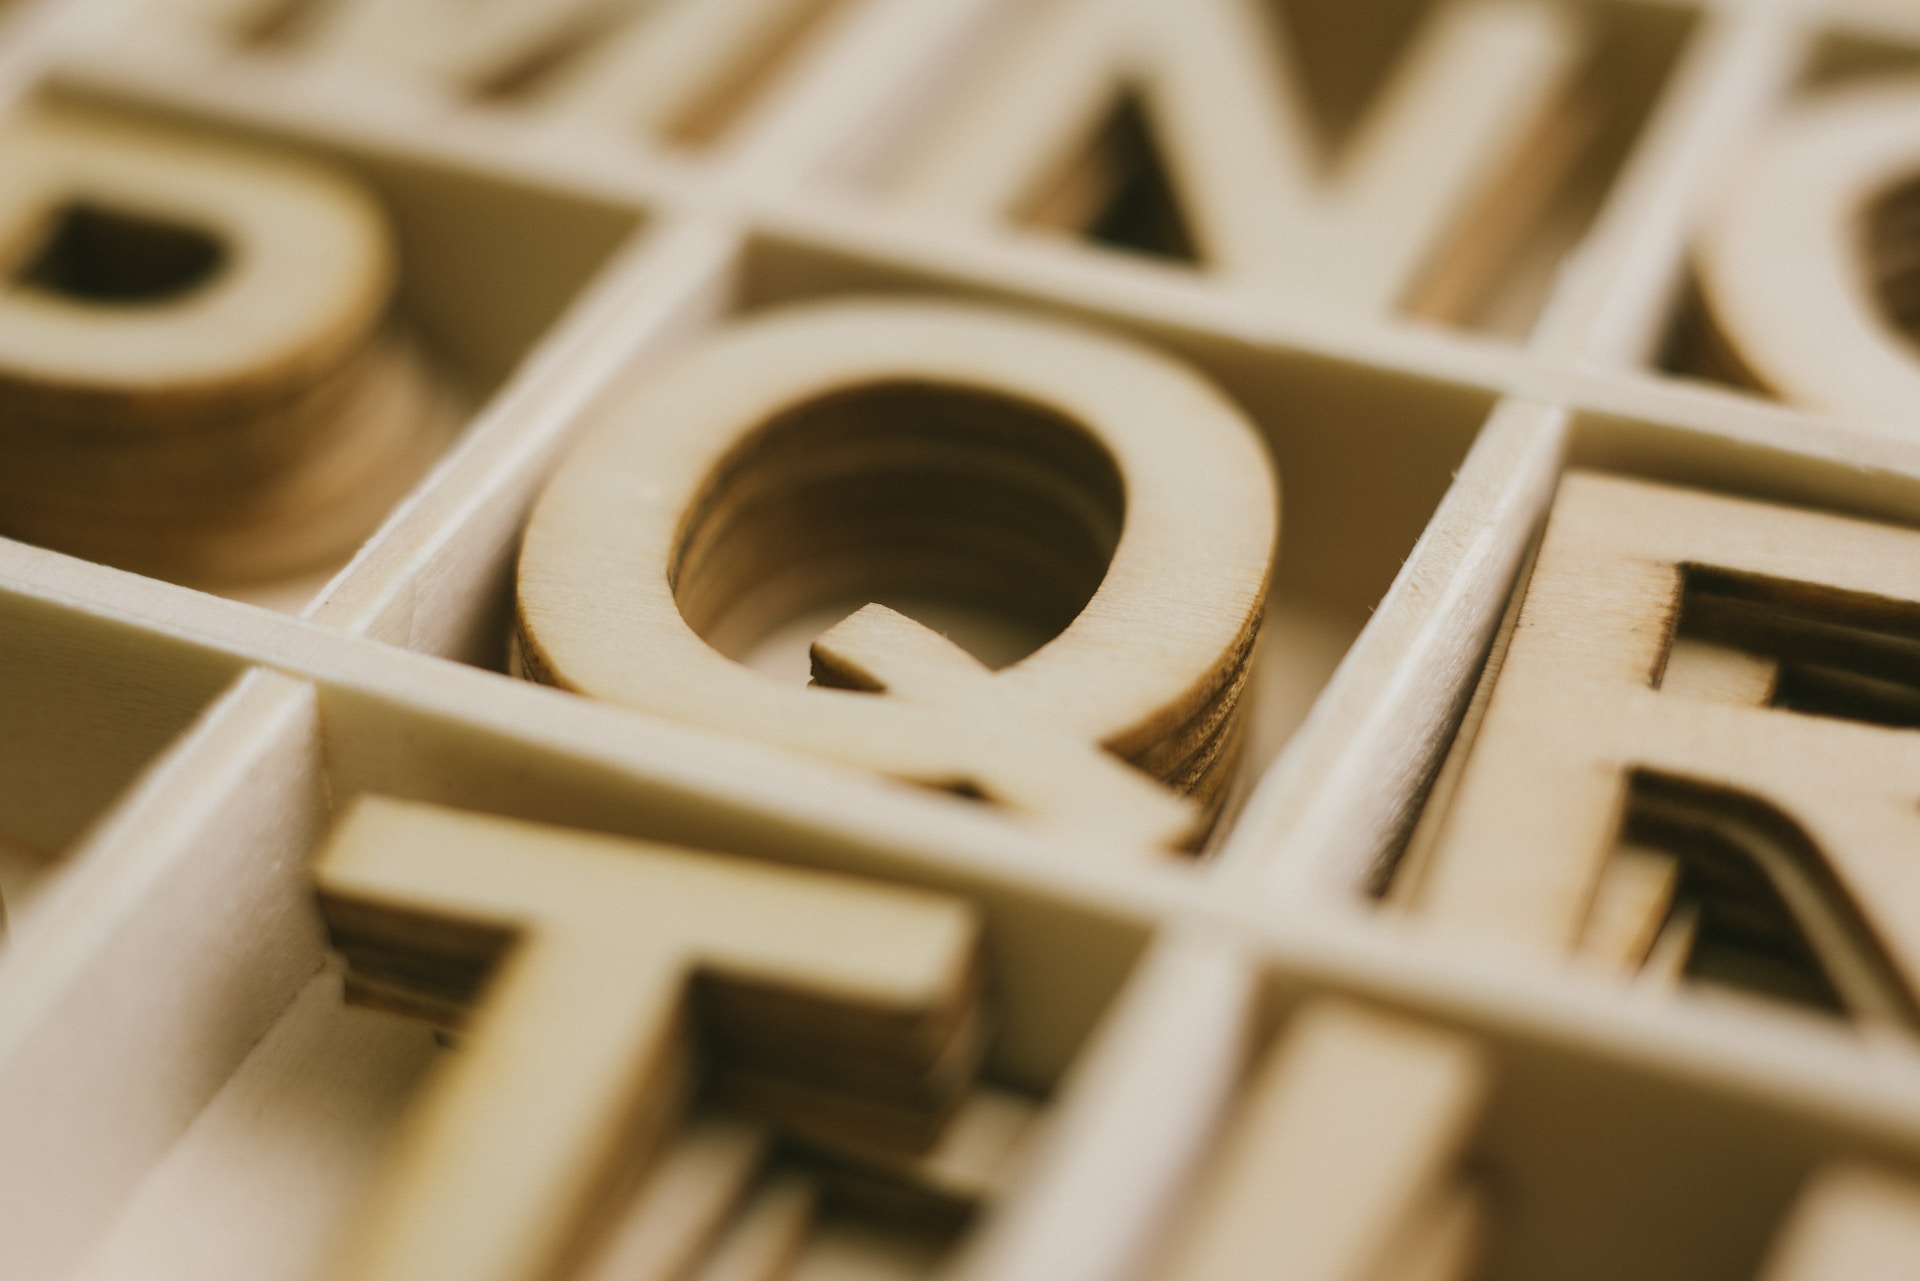 Wooden letters in a box including Q and R